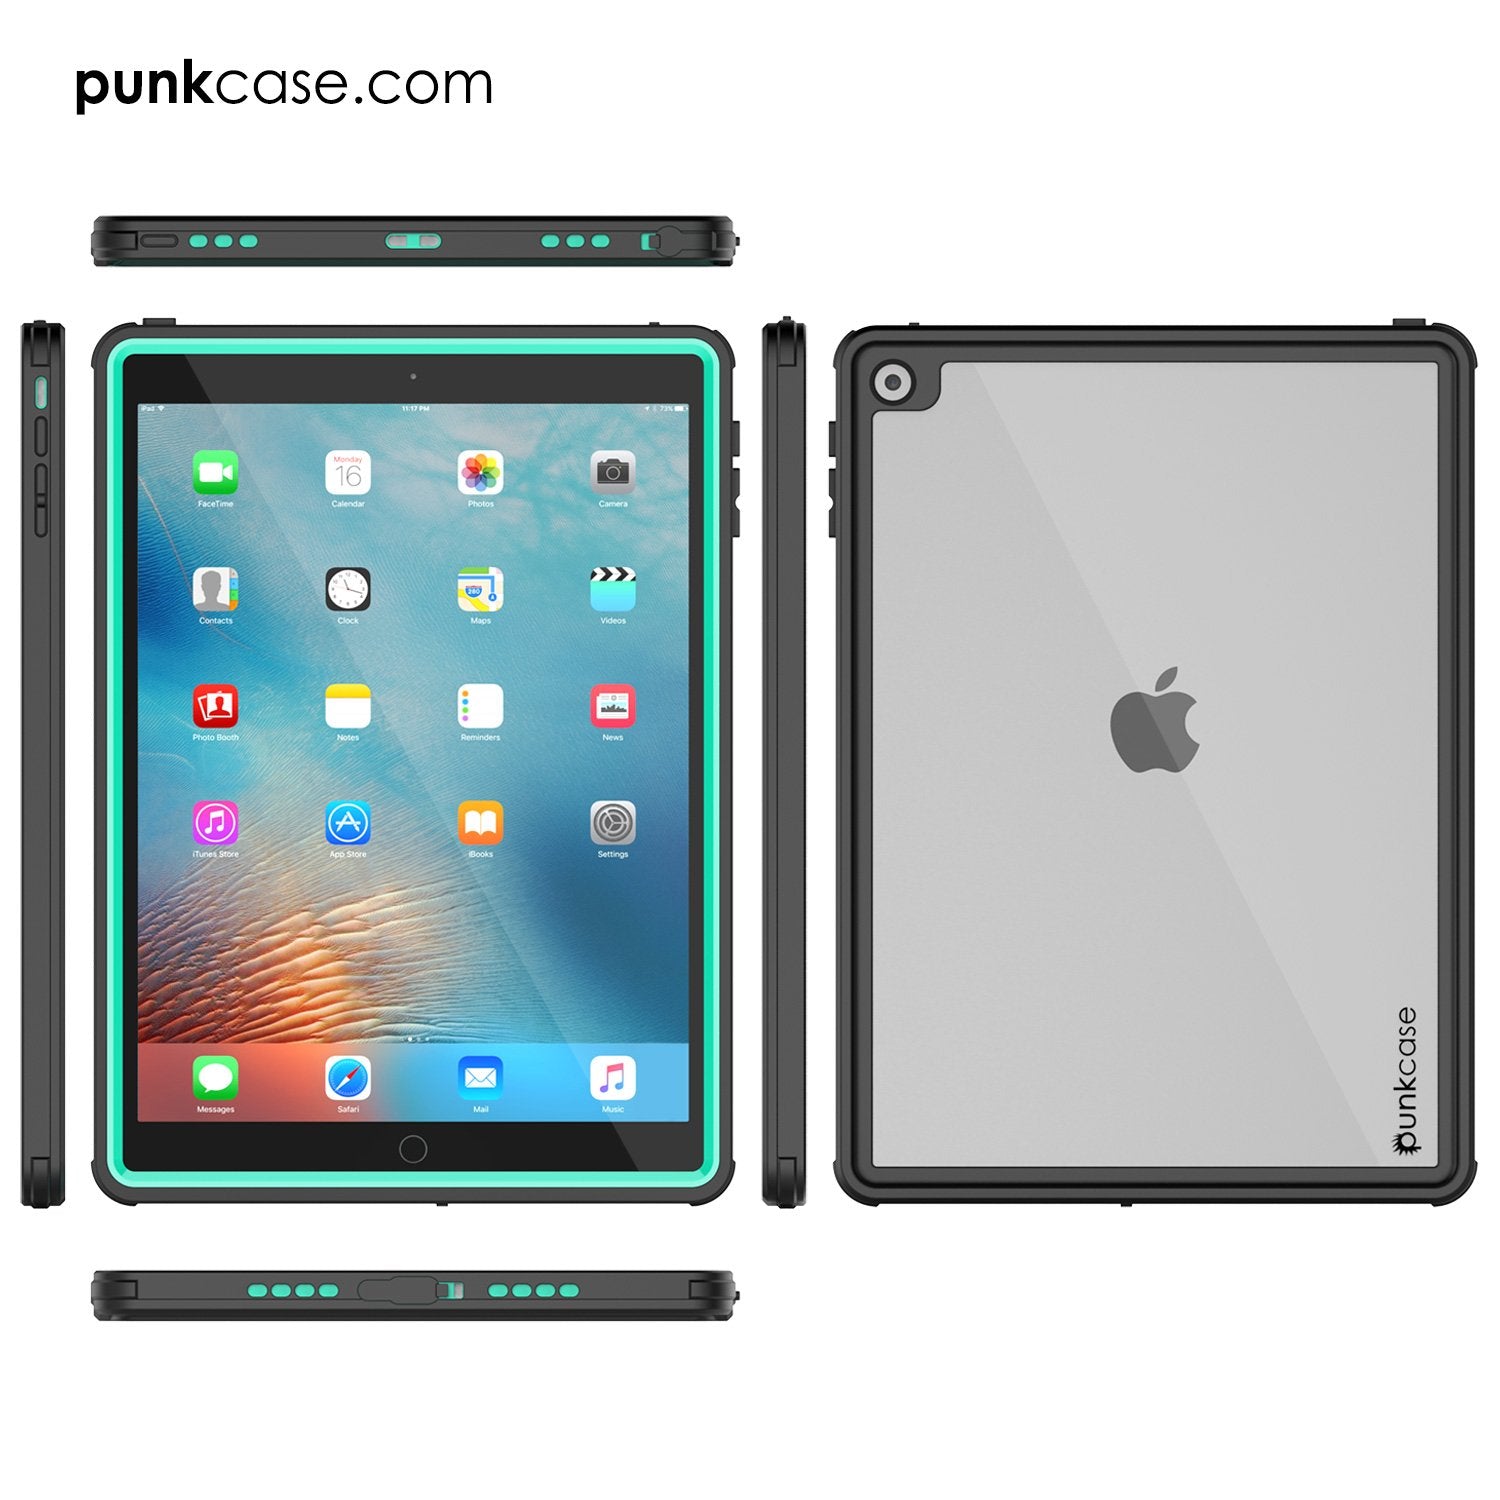 Punkcase iPad Pro 9.7 Case [CRYSTAL Series], Waterproof, Ultra-Thin Cover [Shockproof] [Dustproof] with Built-in Screen Protector [Teal] - PunkCase NZ